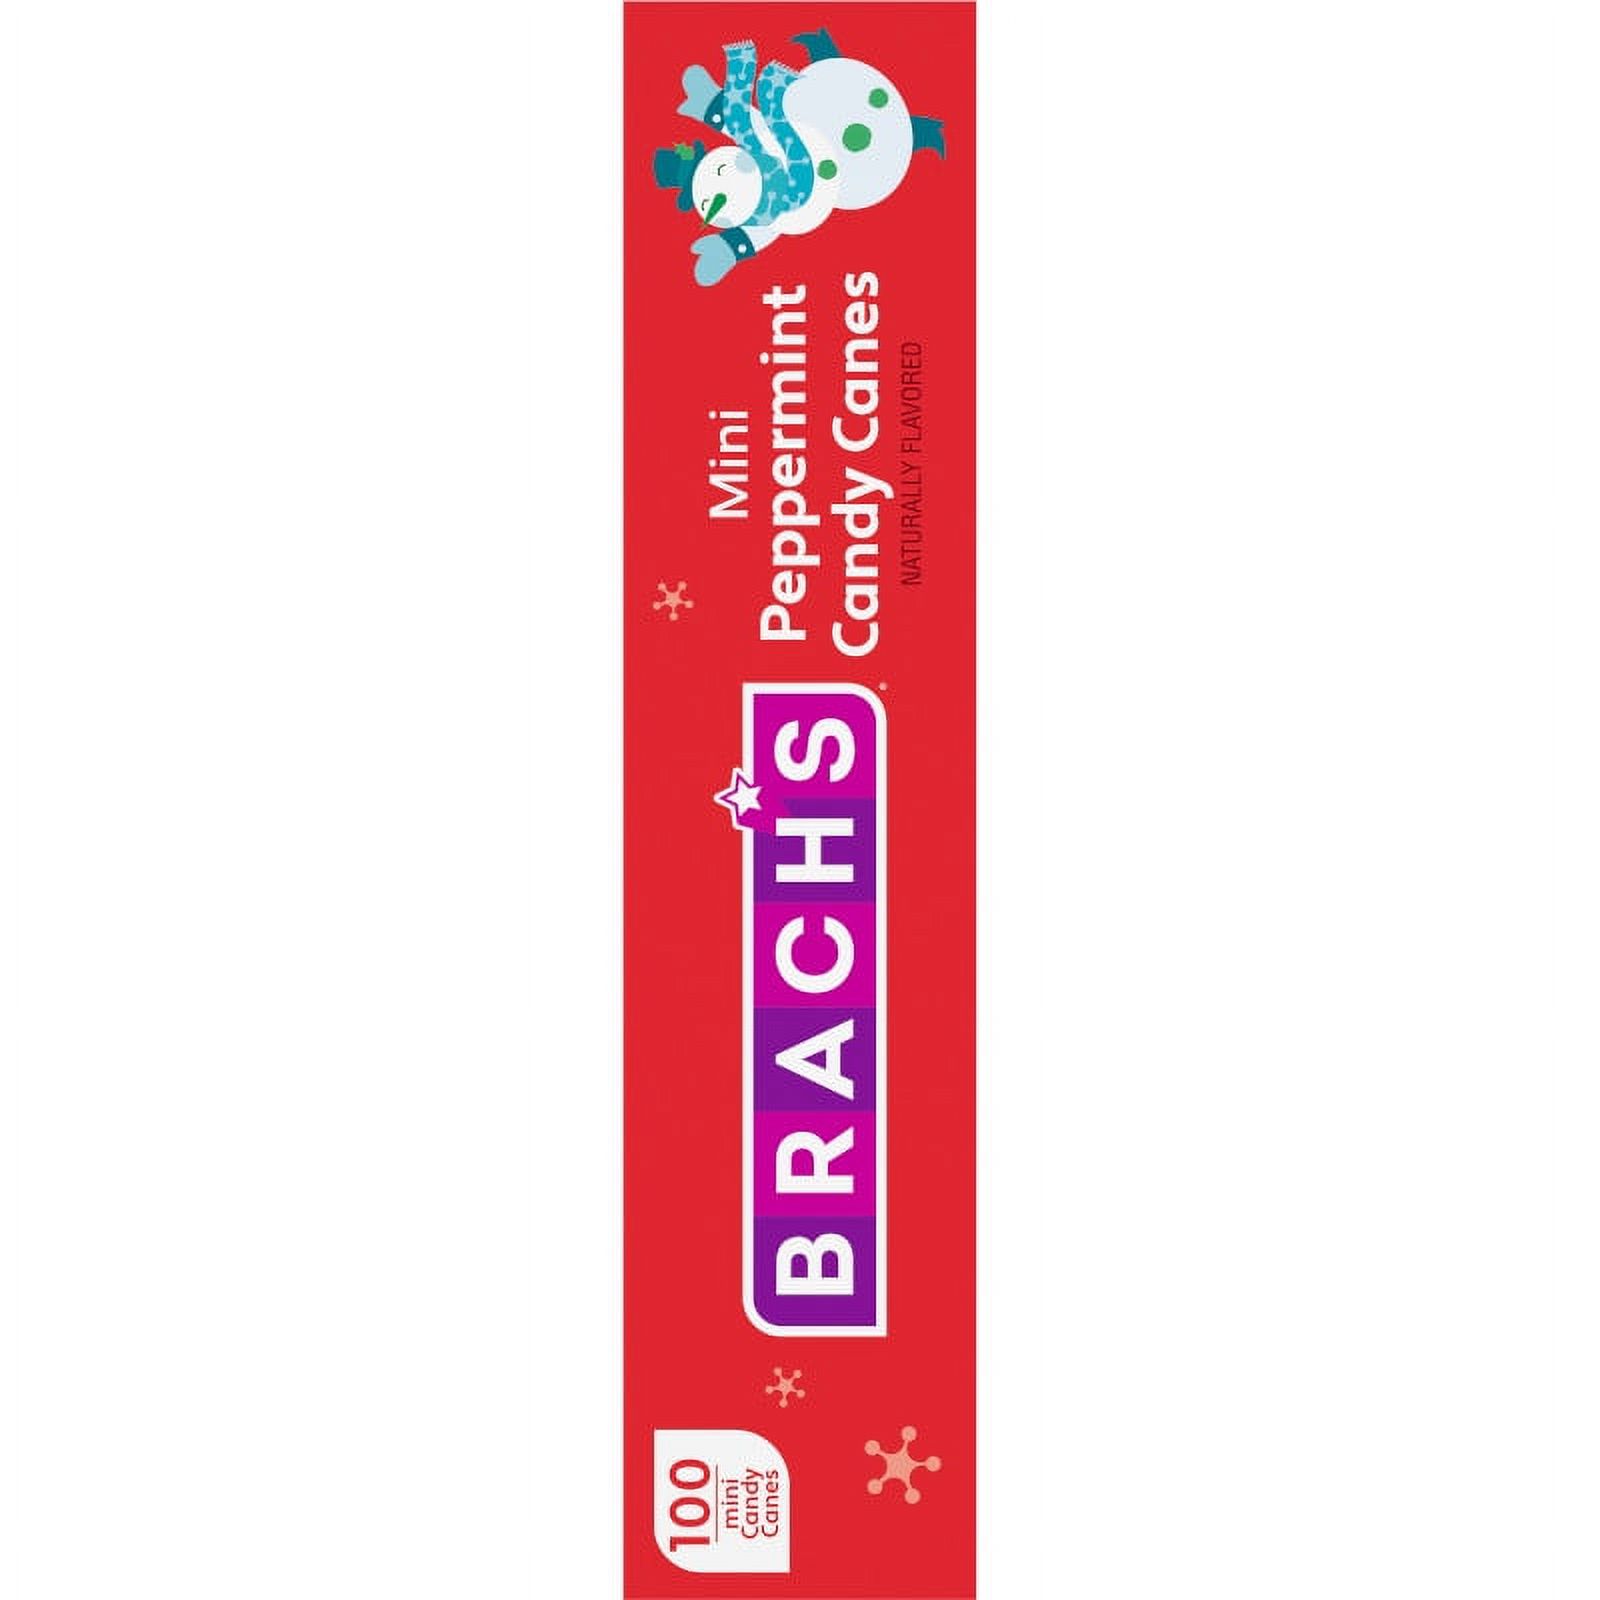 Brach's Mini Peppermint Holiday Candy Canes, Christmas Stocking Stuffer Candy, 100ct Box, 15oz - image 4 of 12